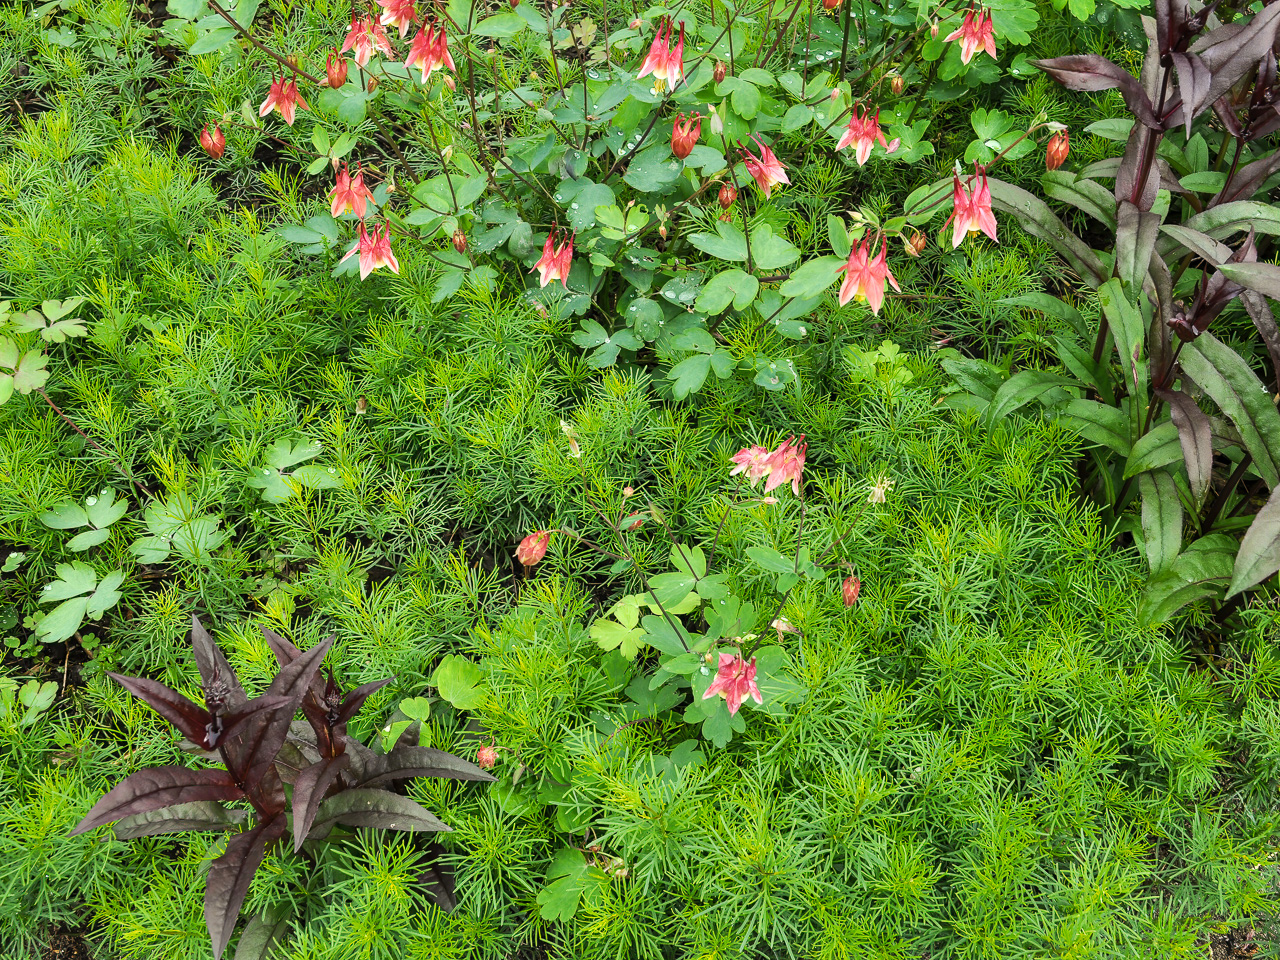 Attractive plant community mix of native plants including coreopsis and columbine